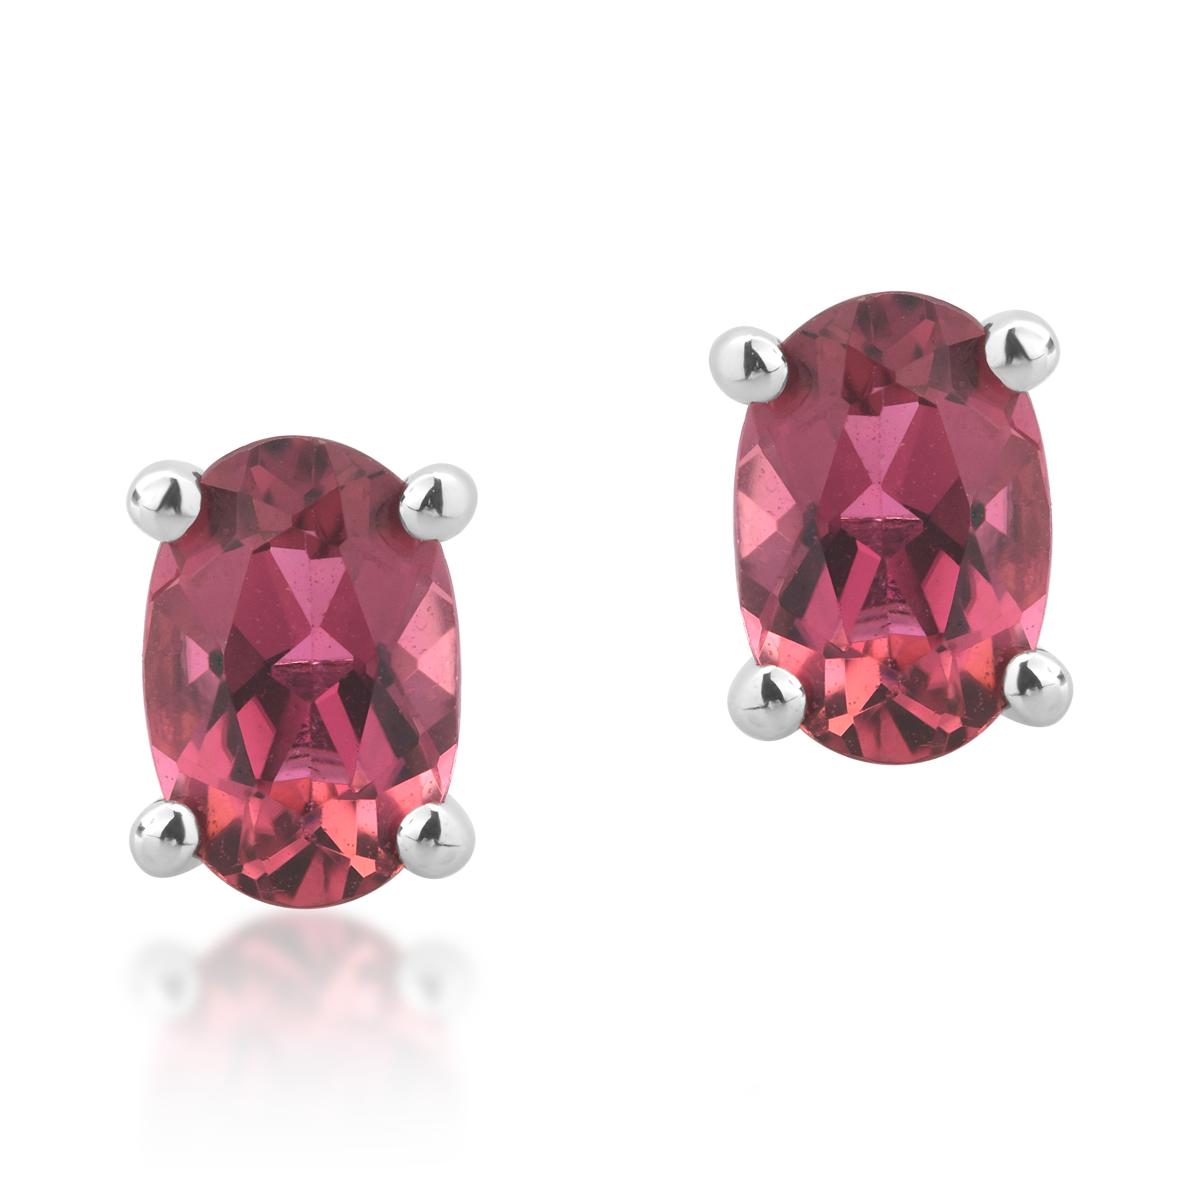 18K white gold earrings with 0.85ct rose tourmalines